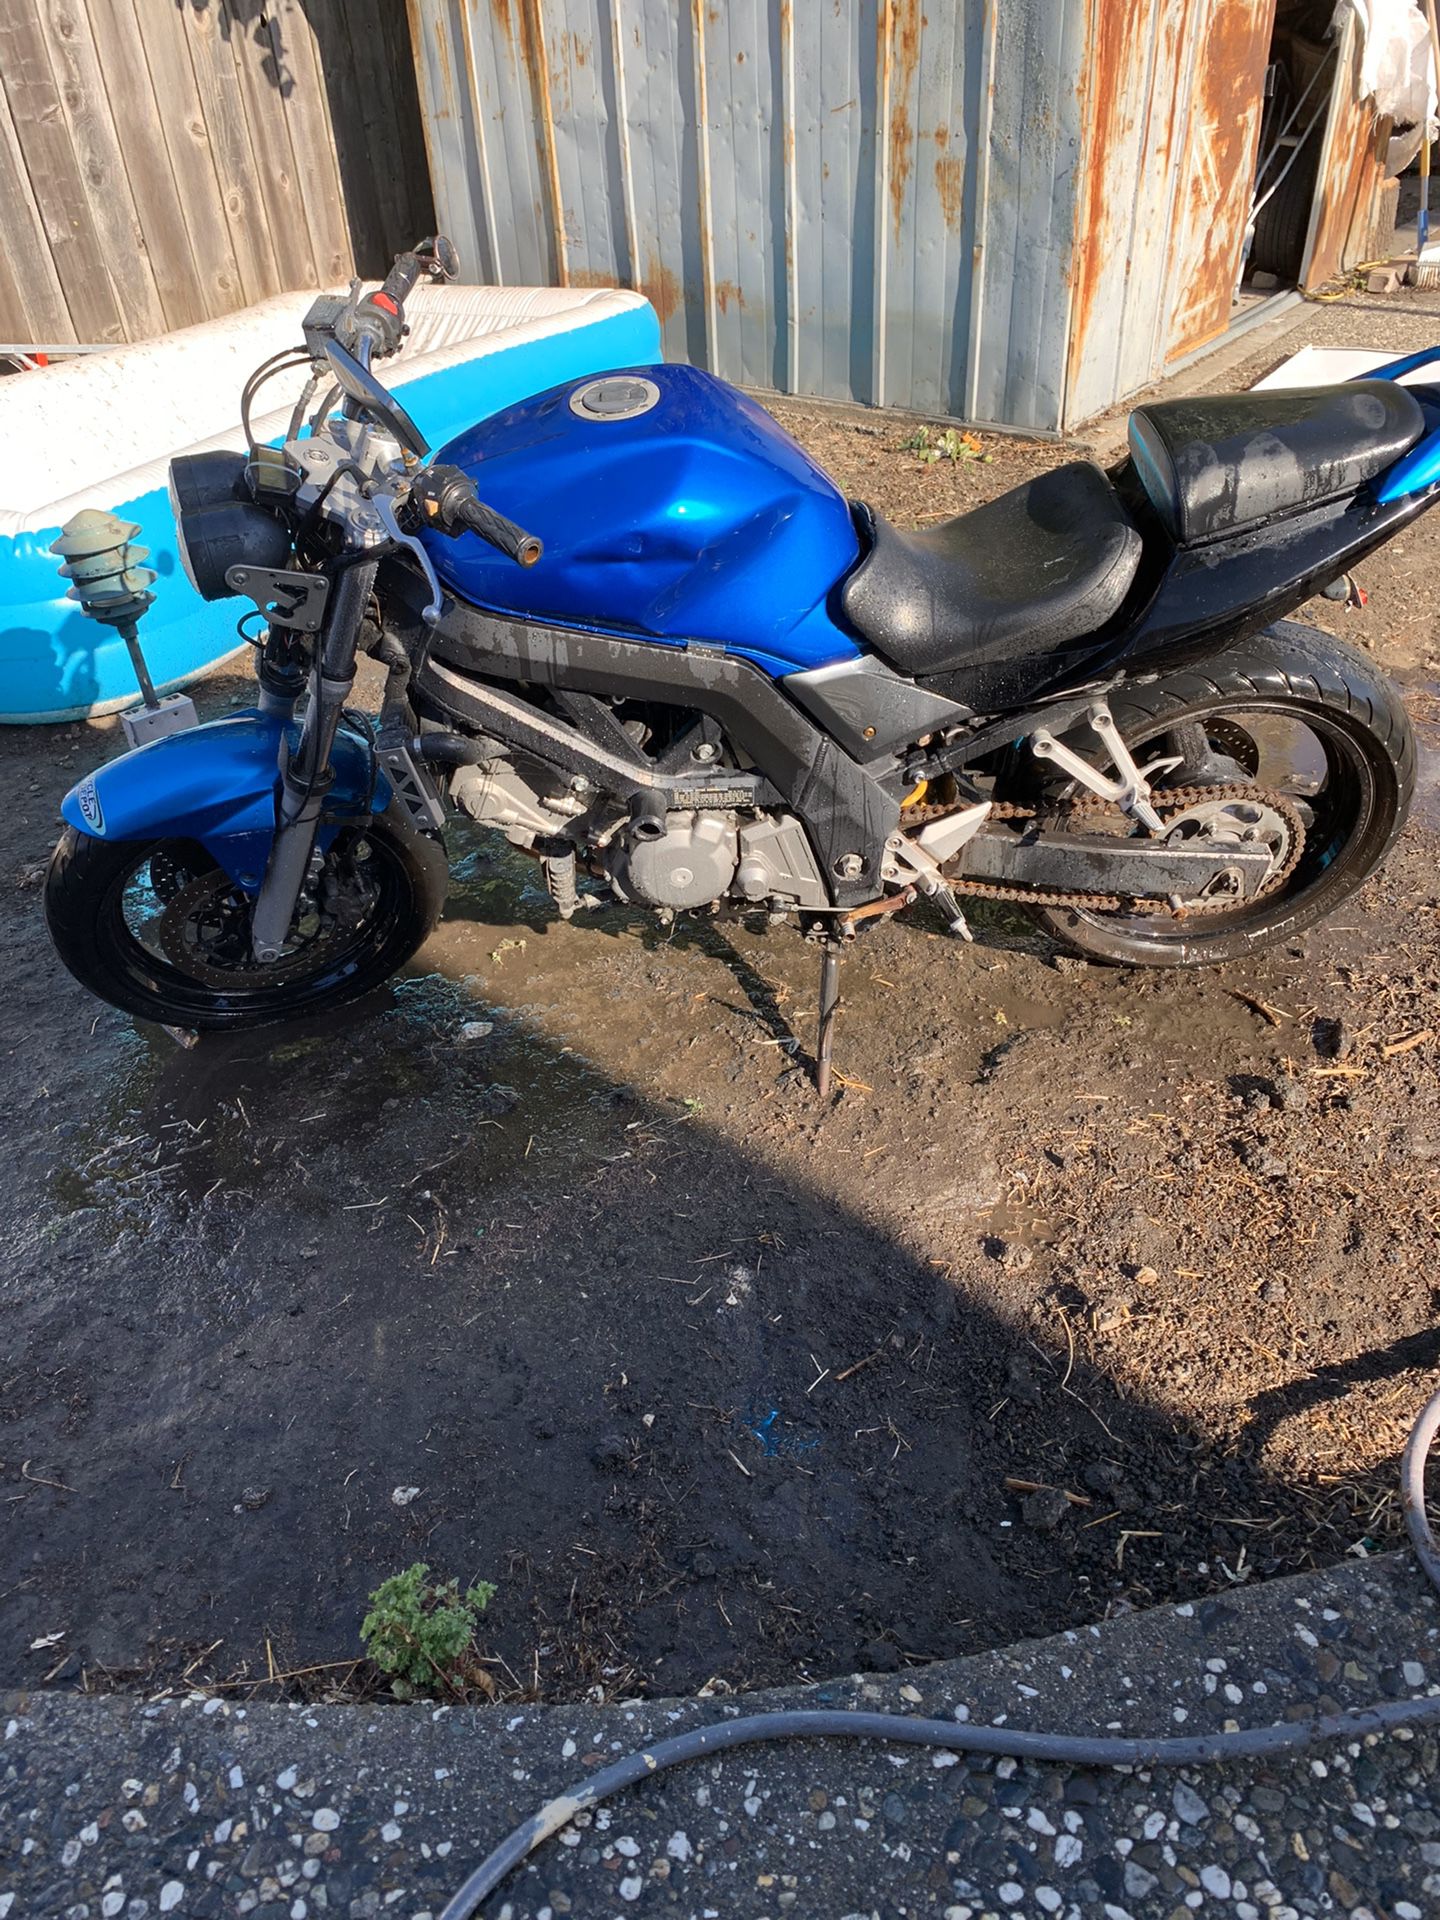 2007 Suzuki svr 650 good condition, runs great! I owe $237 registration. I’m selling it because I need to pay a lawyer for speeding tickets $100 firm